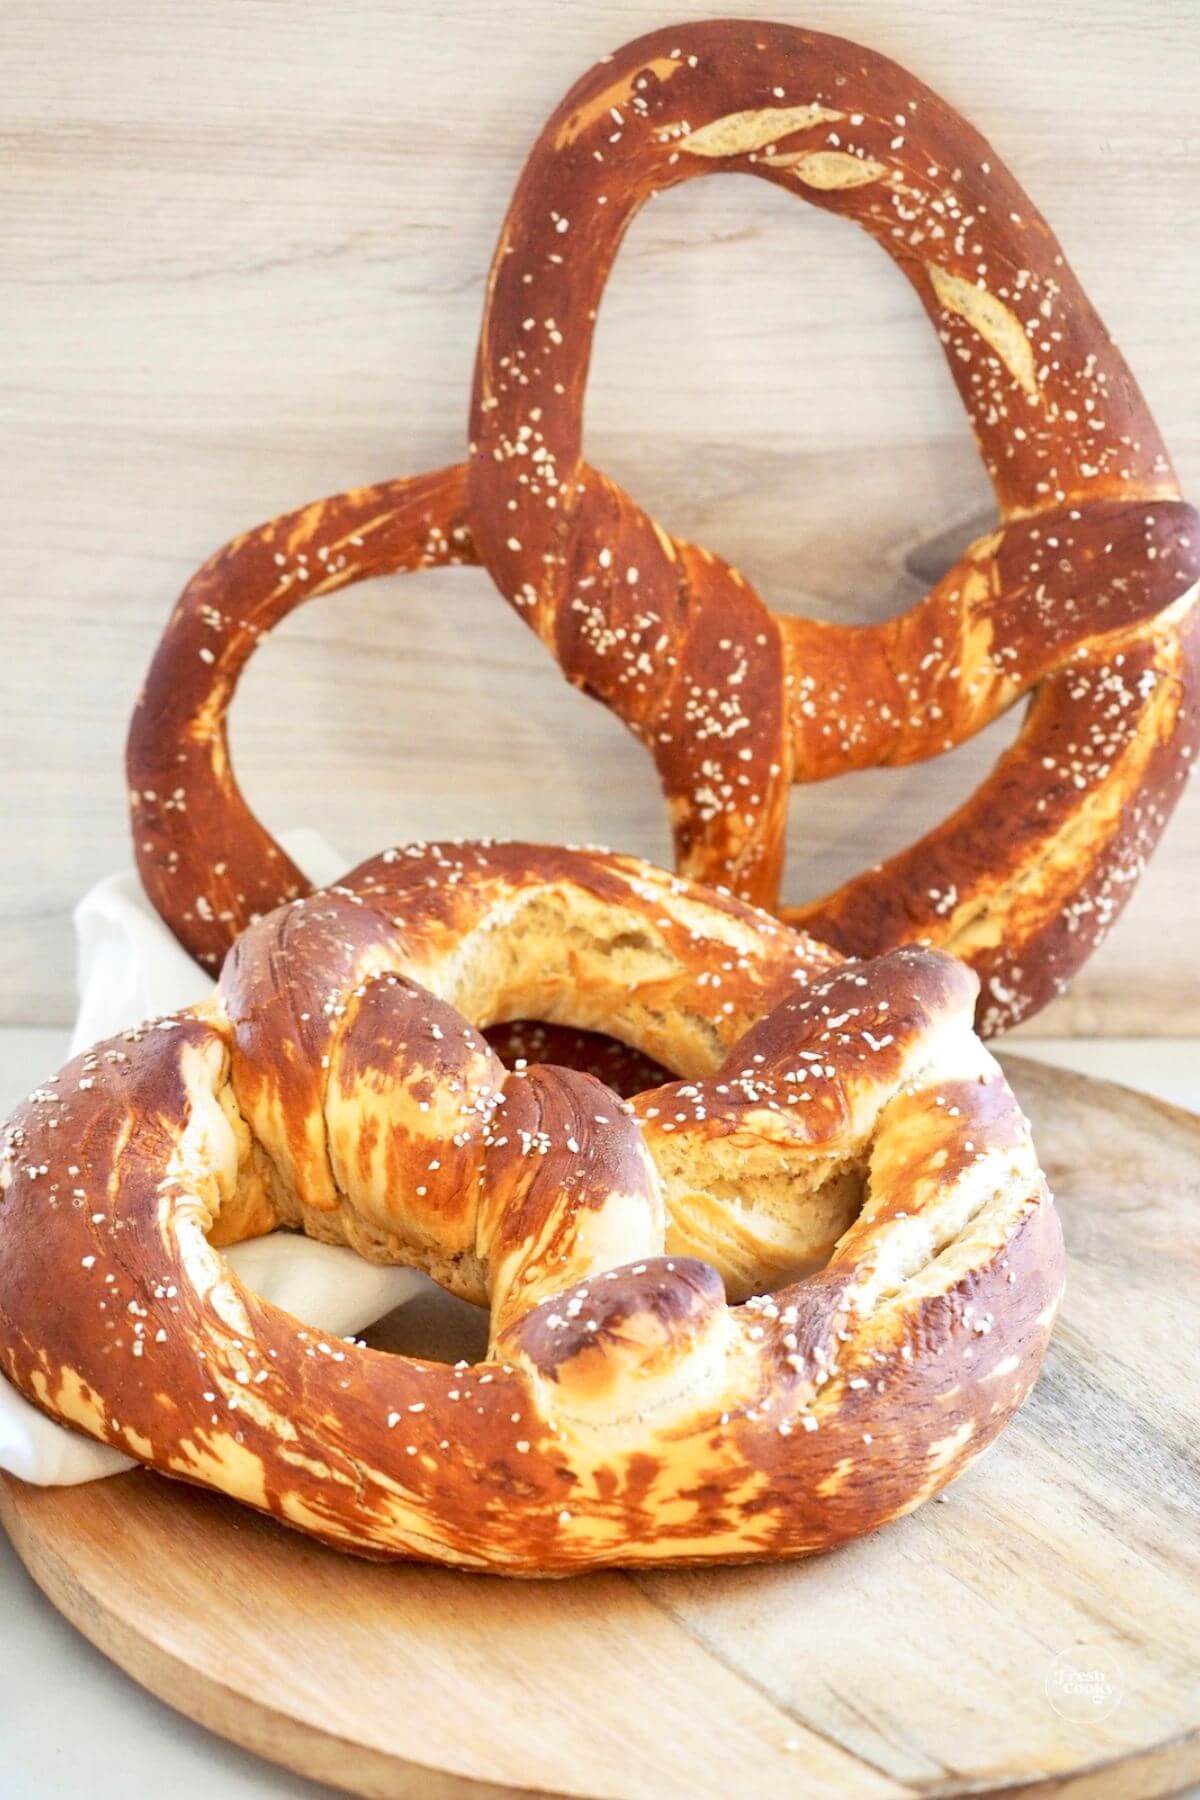 Two large German pretzels golden and ready to eat.